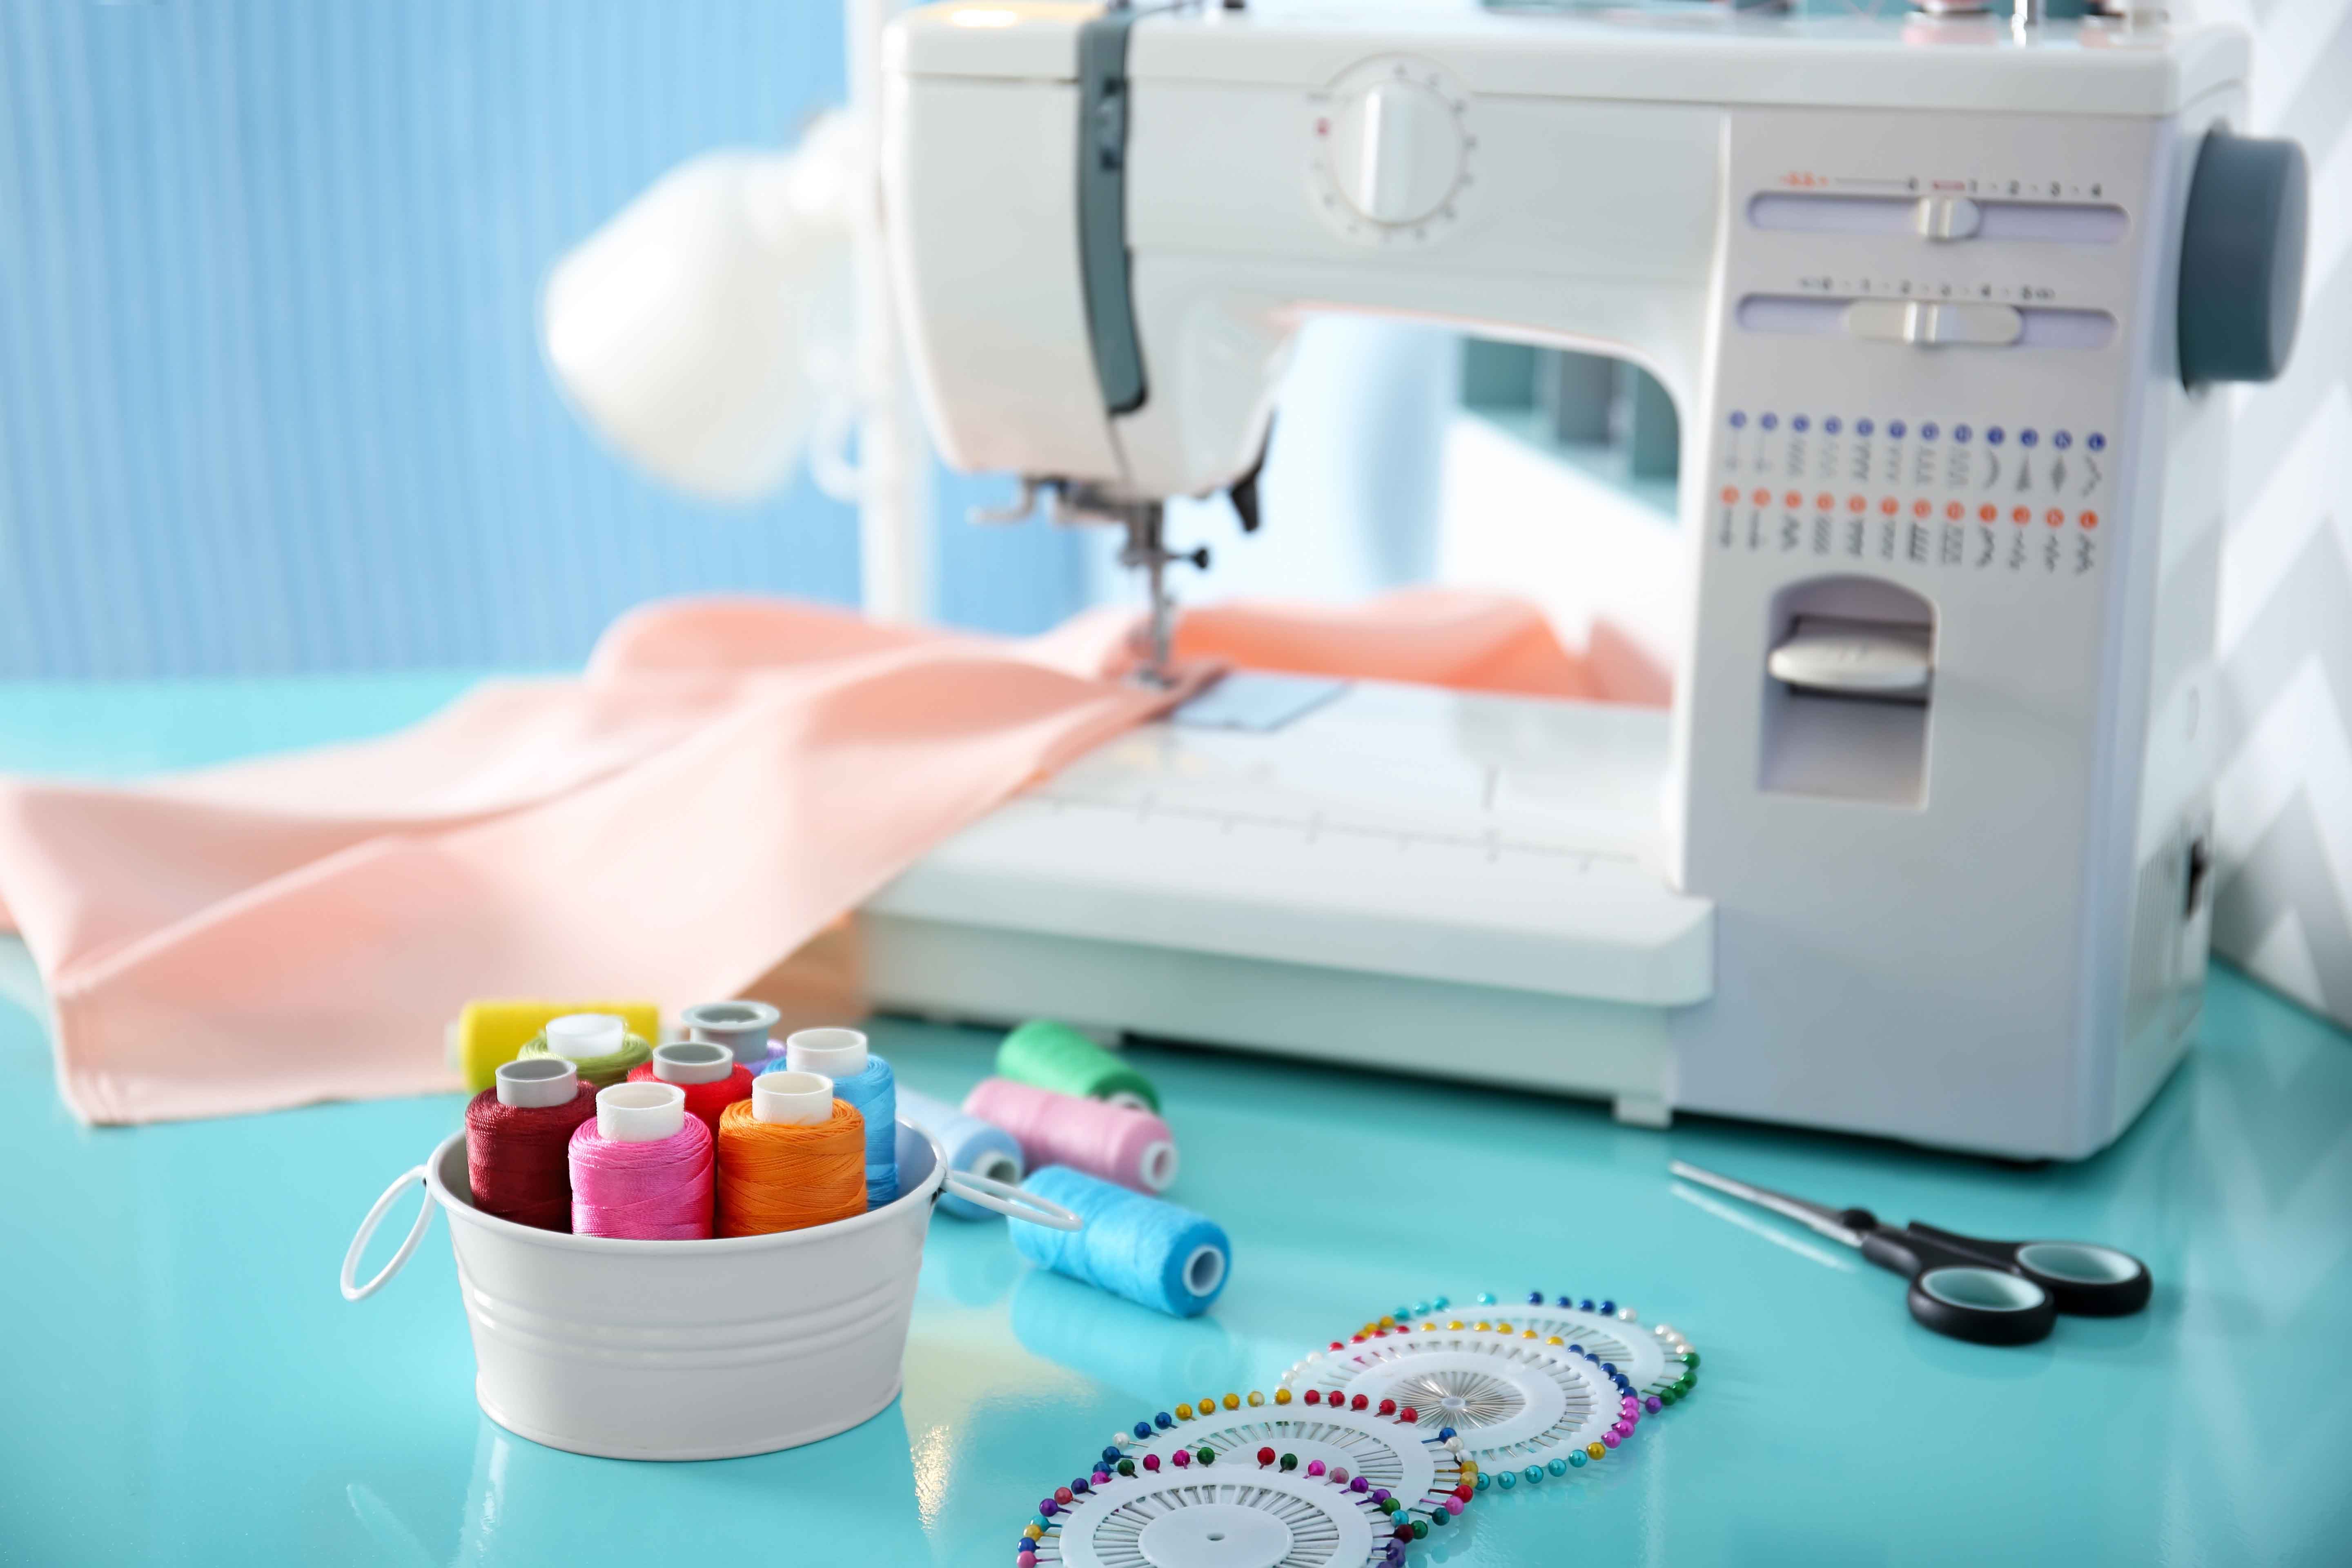 How To Operate A Sewing Machine Reverasite